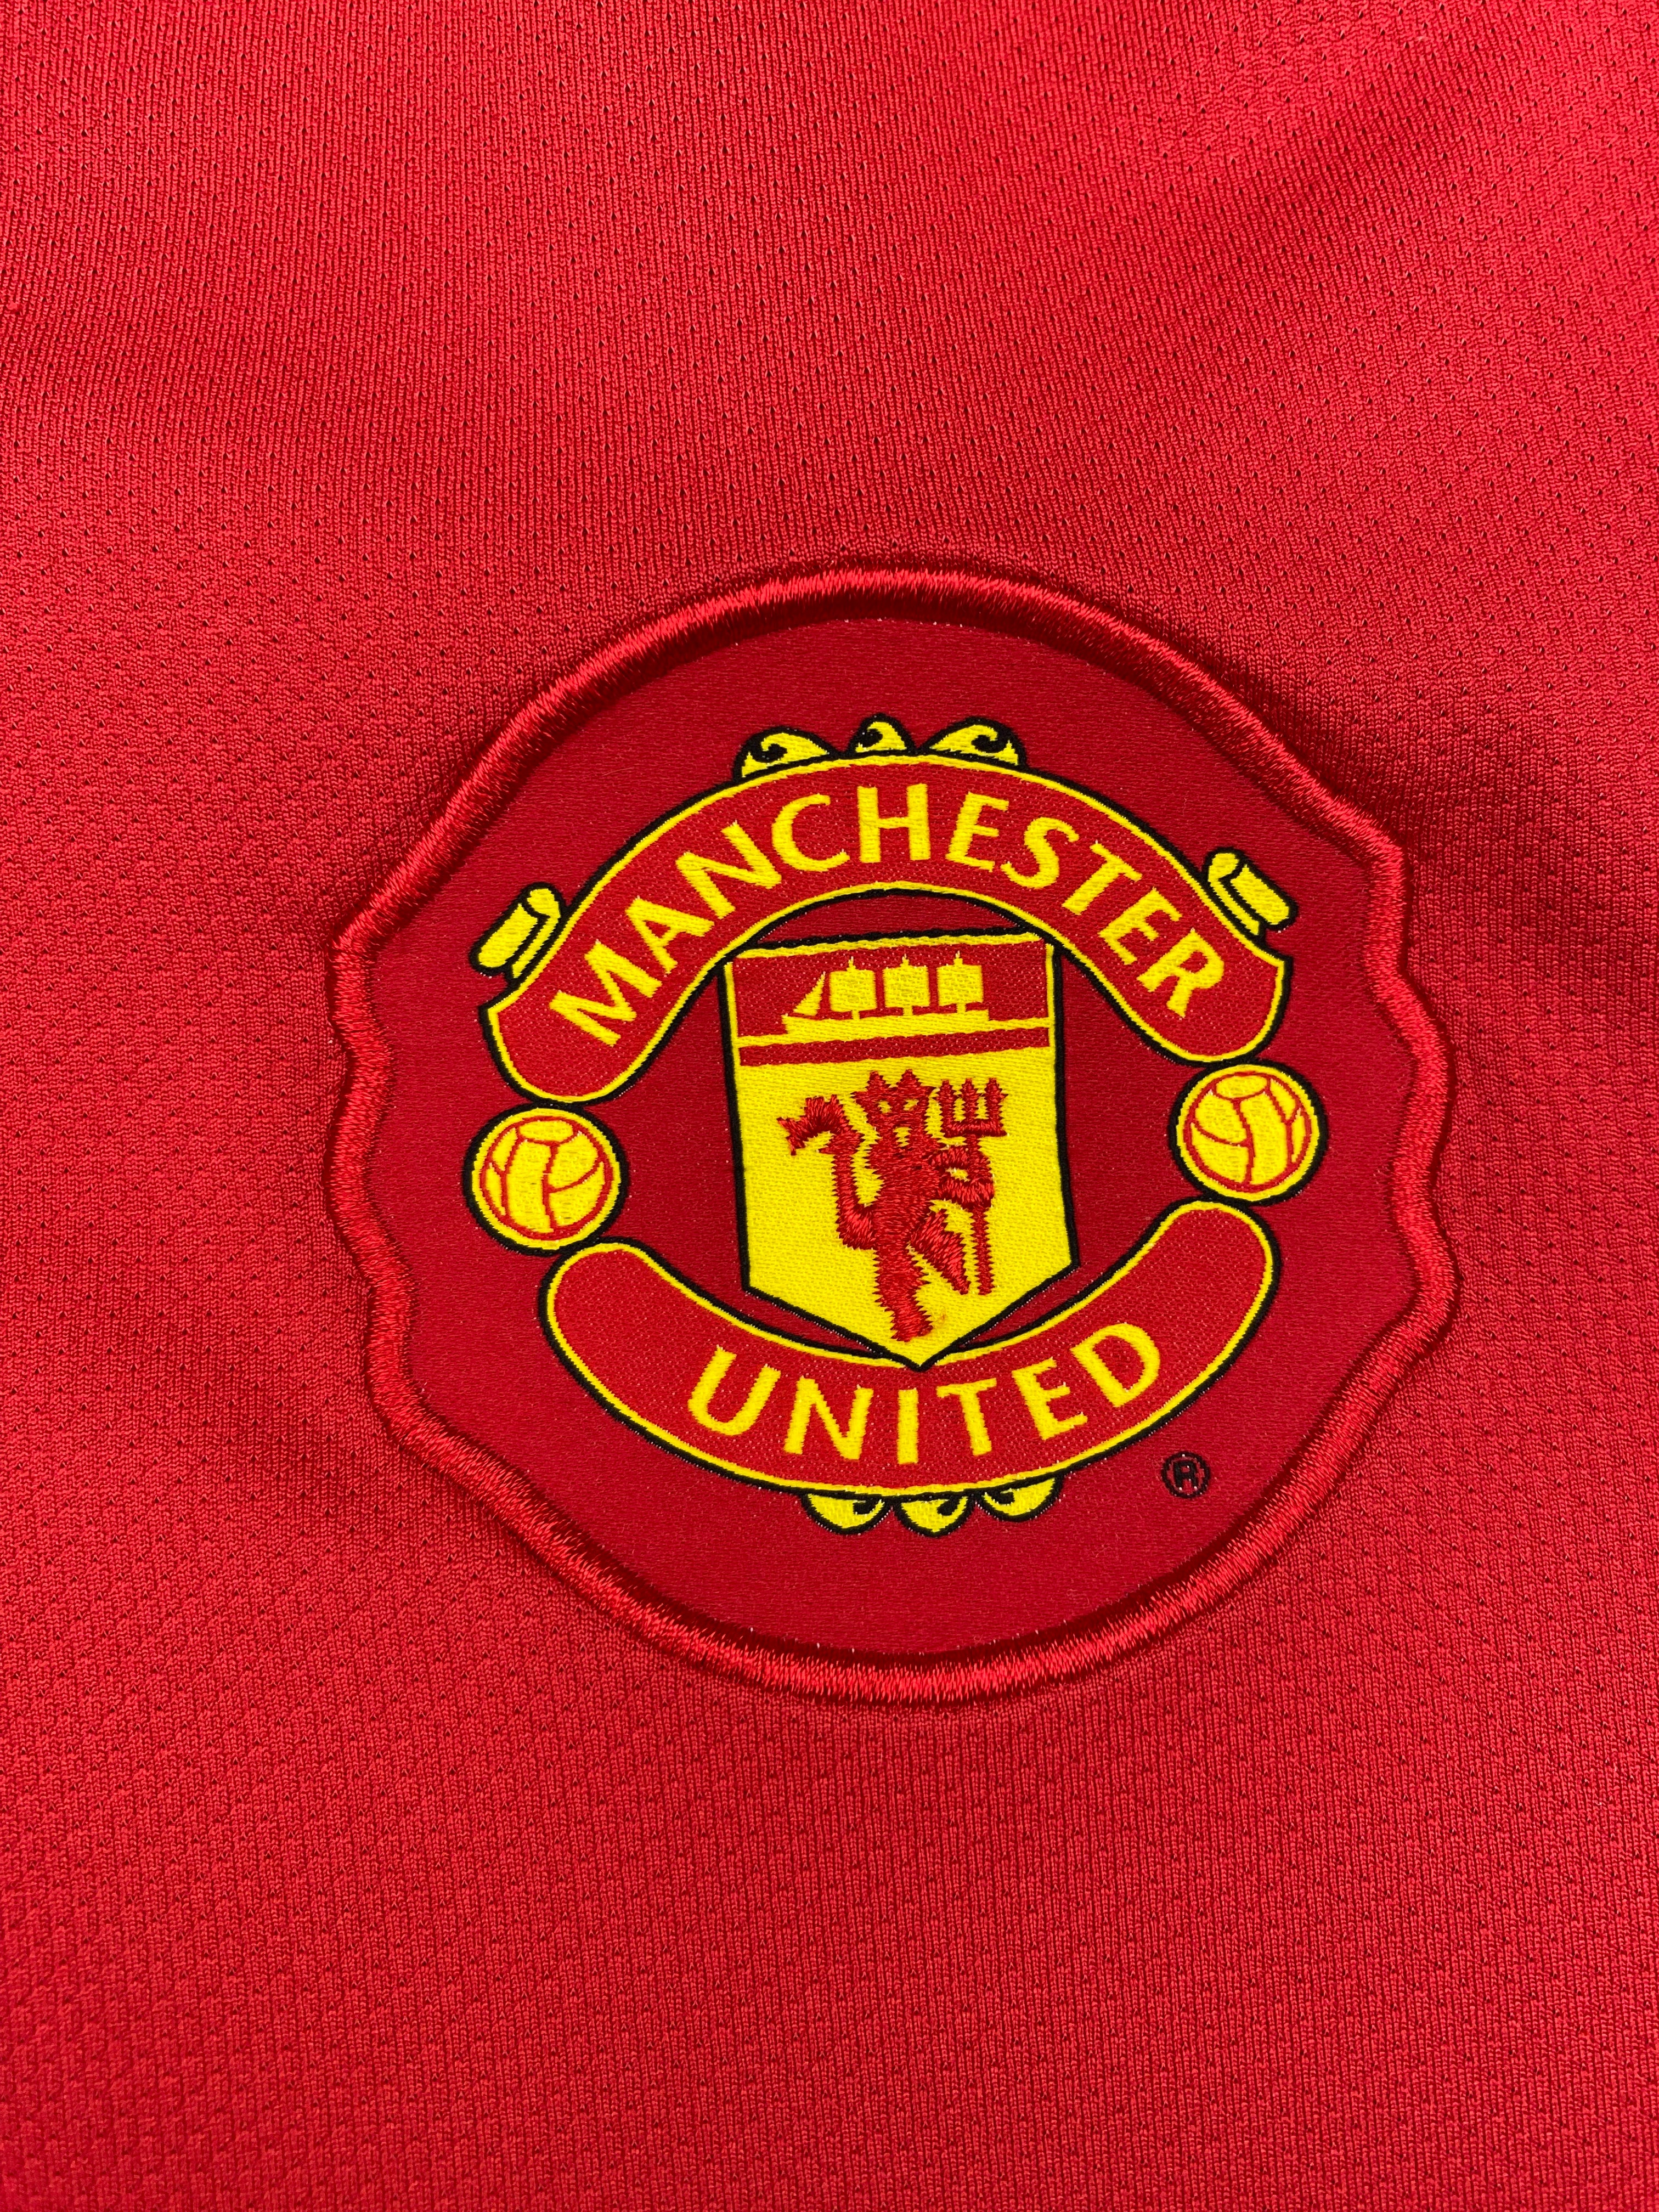 2010/11 Manchester United Home Shirt (L) 8/10